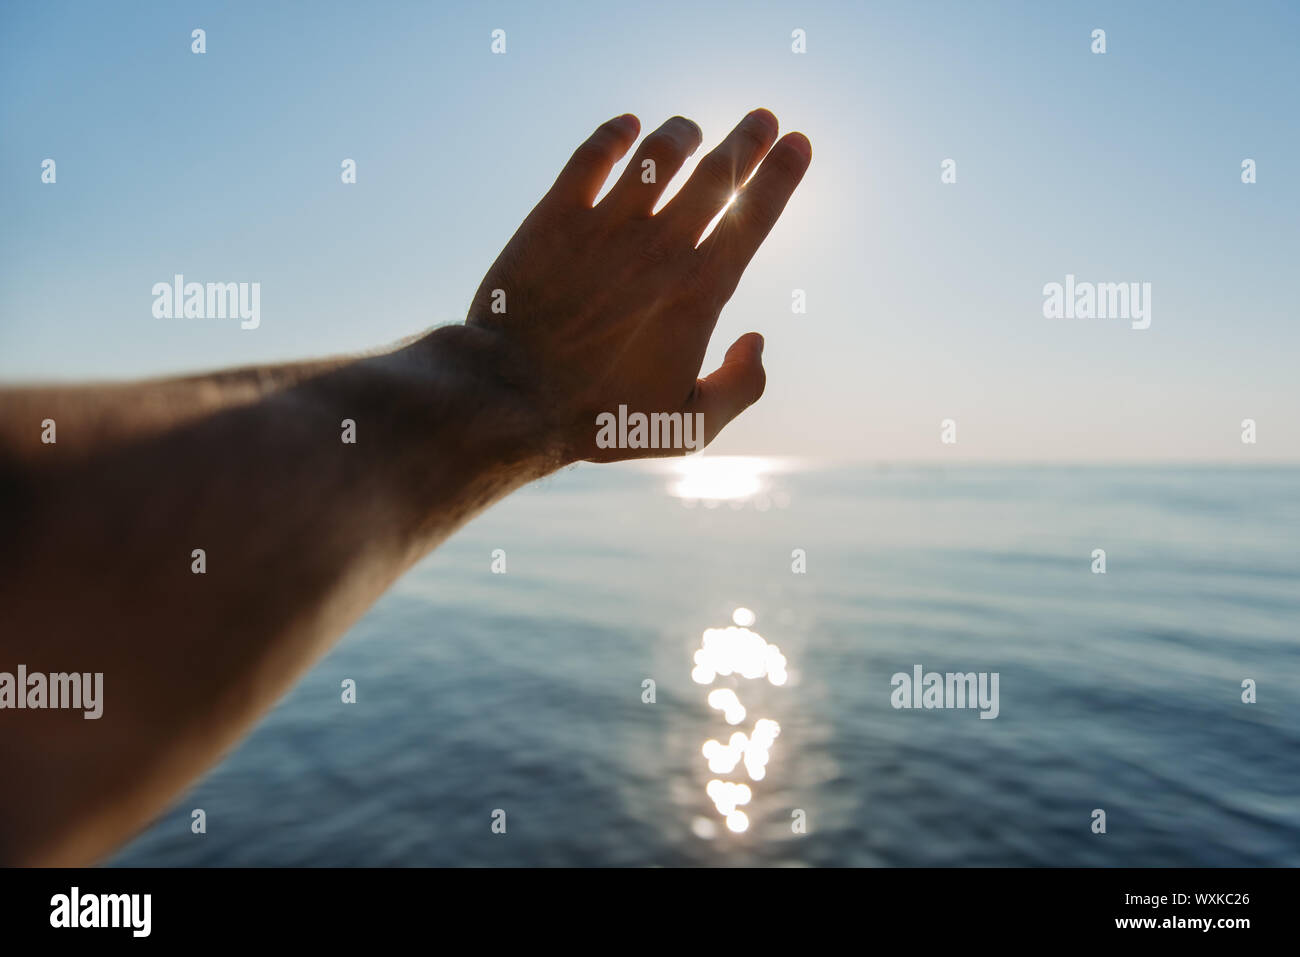 Man's hand reaching for the sun Stock Photo